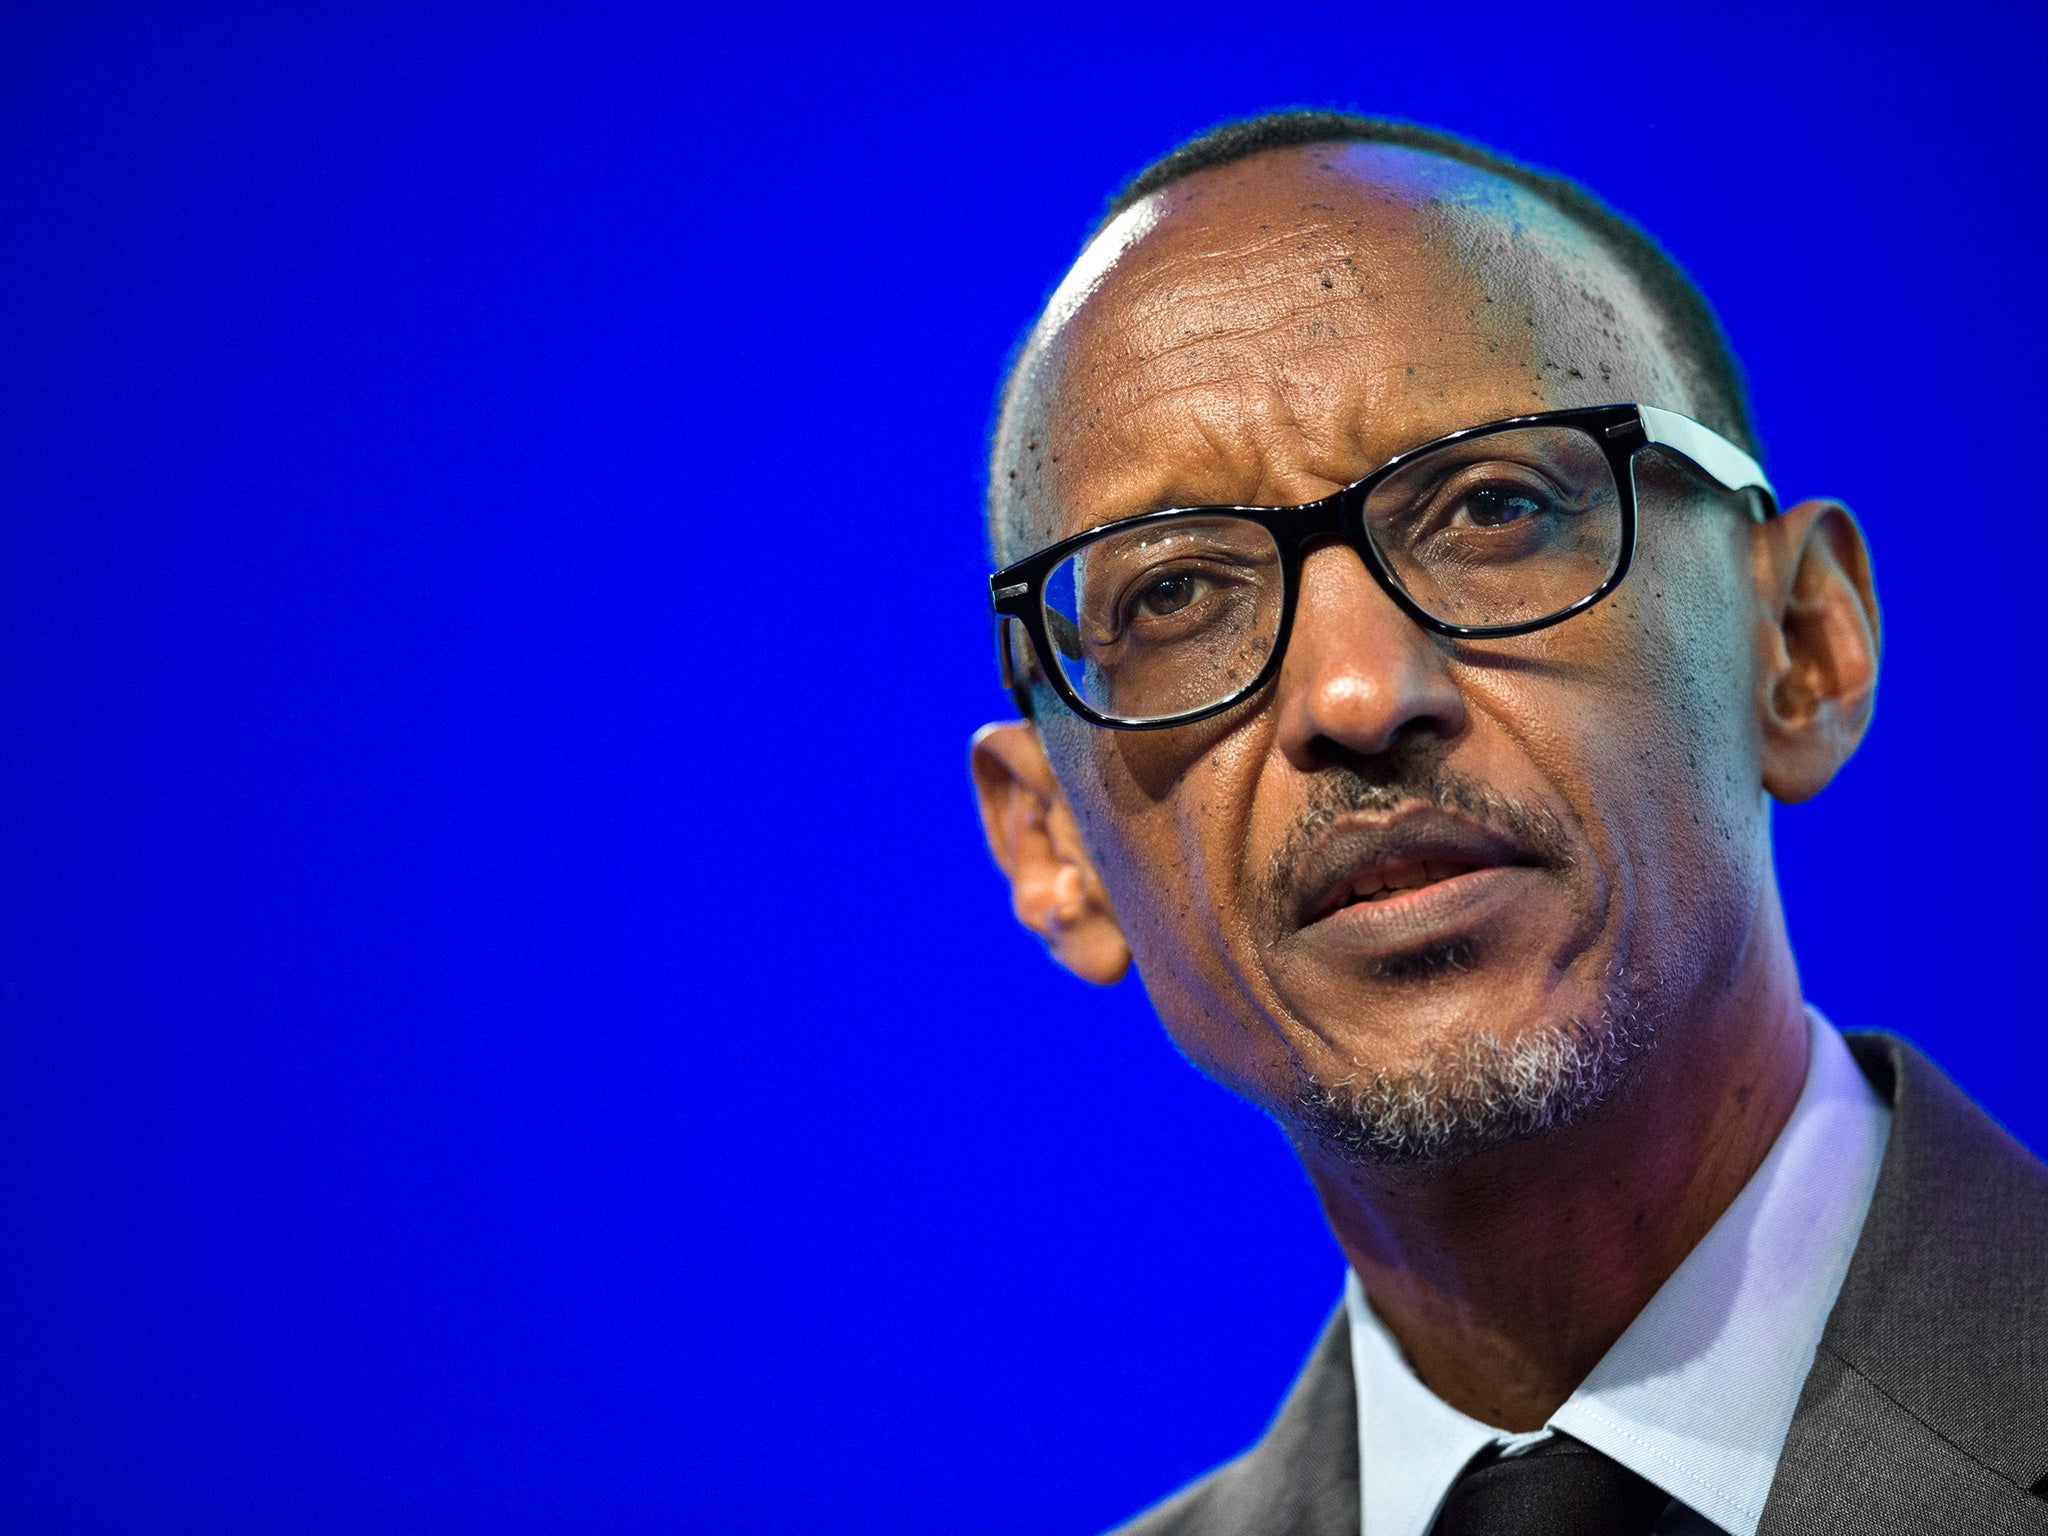 Paul Kagame’s second seven-year term as president expires in 2017